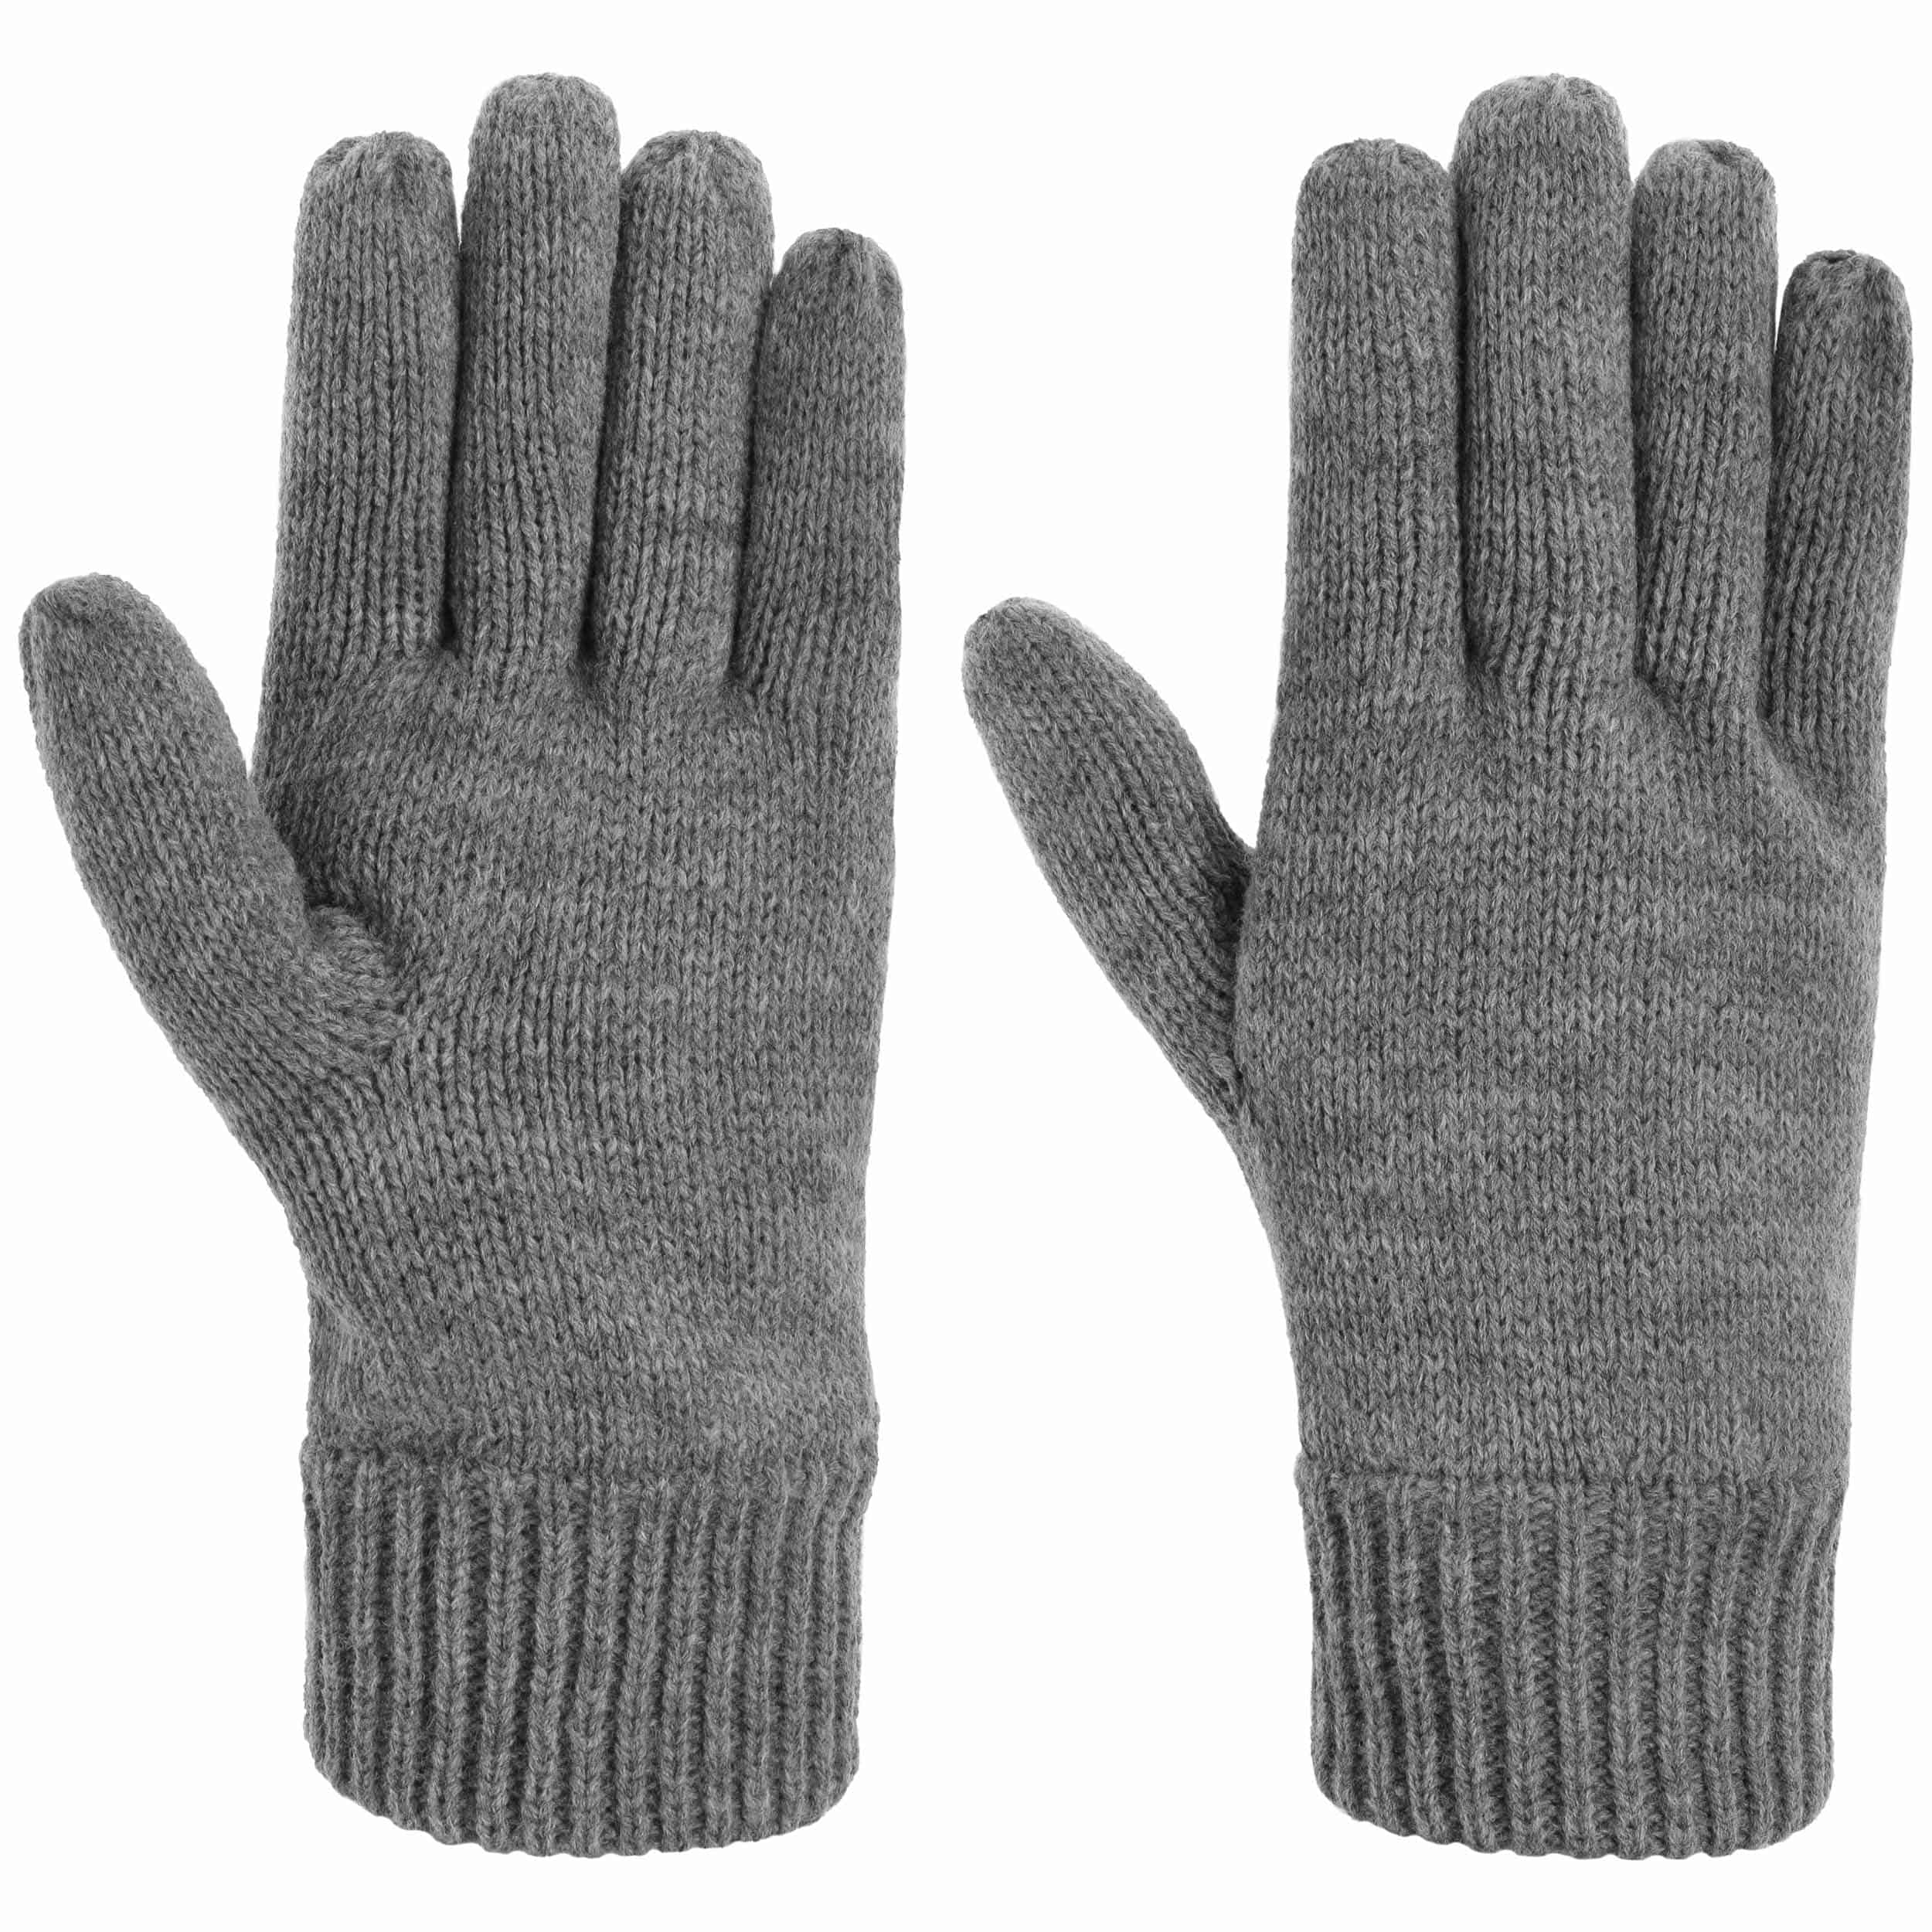 Thinsulate 3M Knit Gloves Lipodo € - 19,95 by